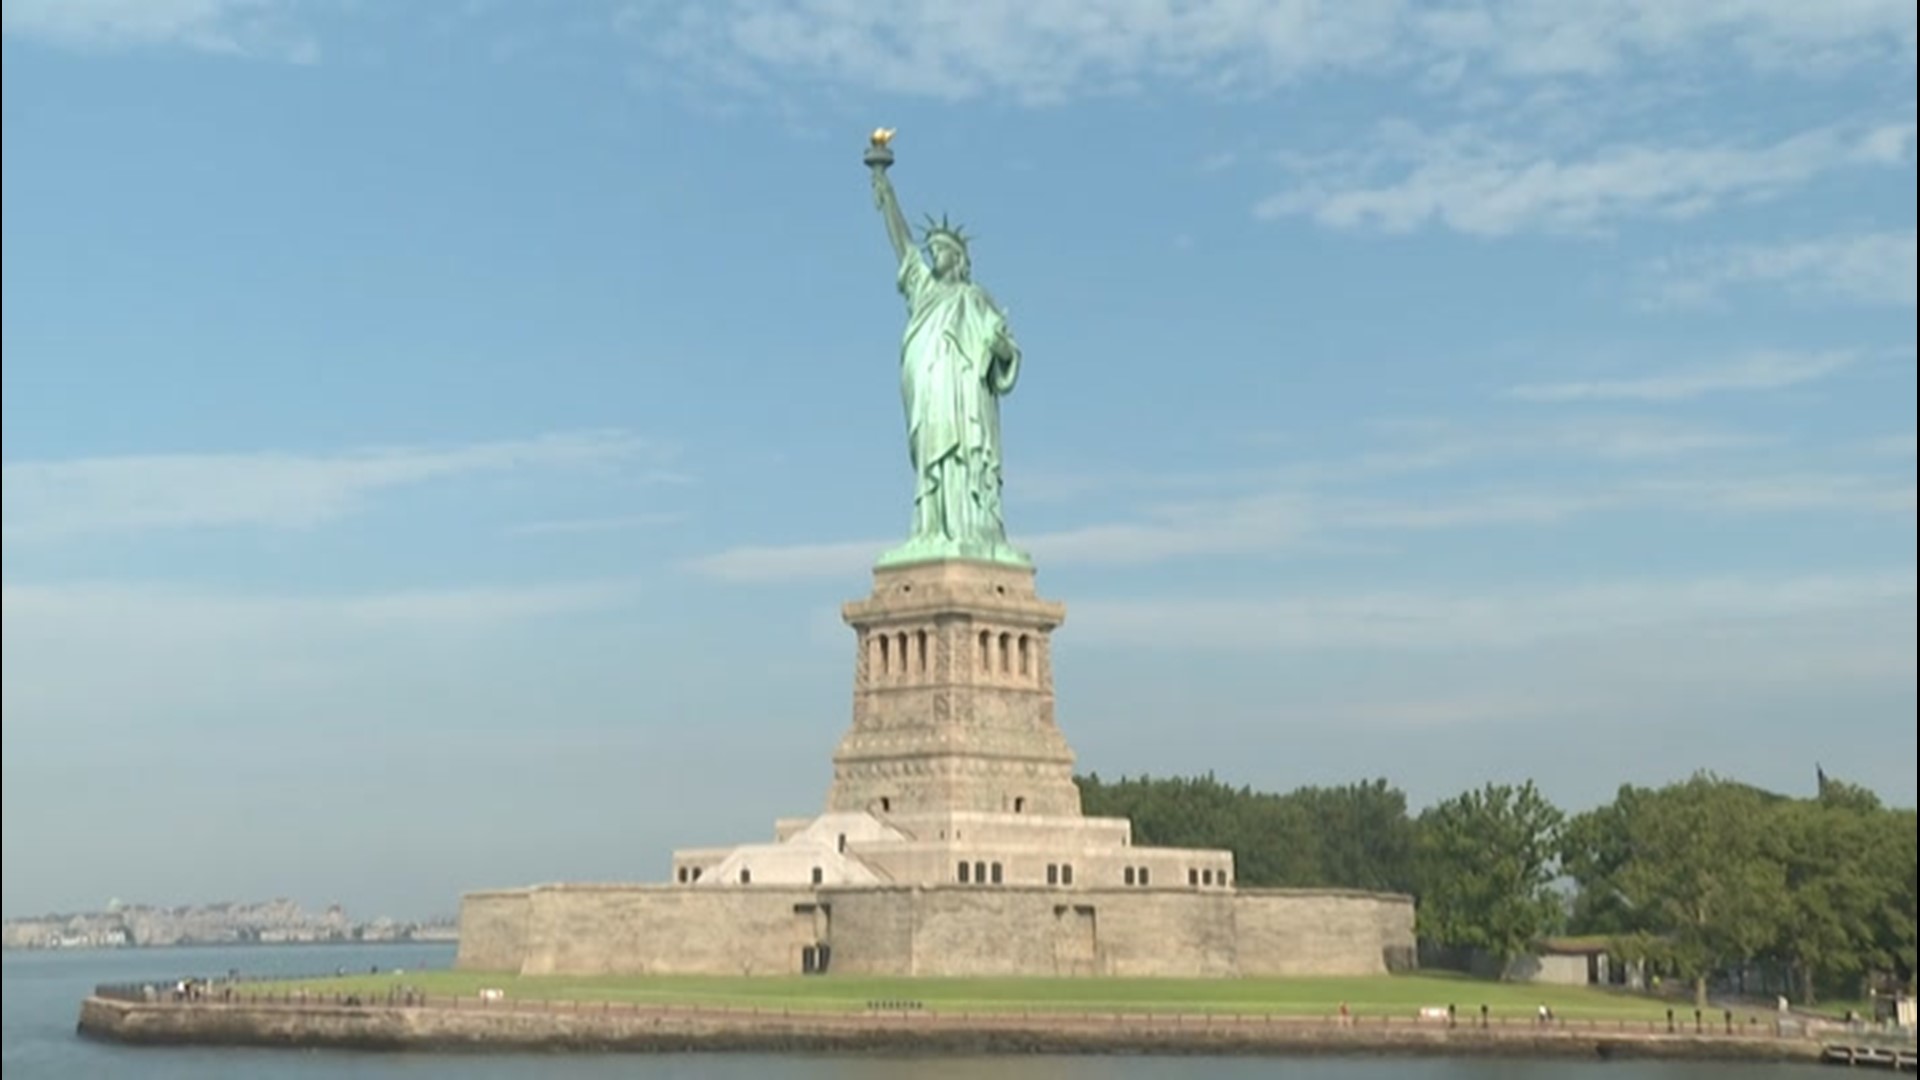 After months of being closed, the Statue of Liberty in New York, New York, has reopened to guests. While visitors can't enter the statue, they're able to visit Liberty Island, where the statue is located.